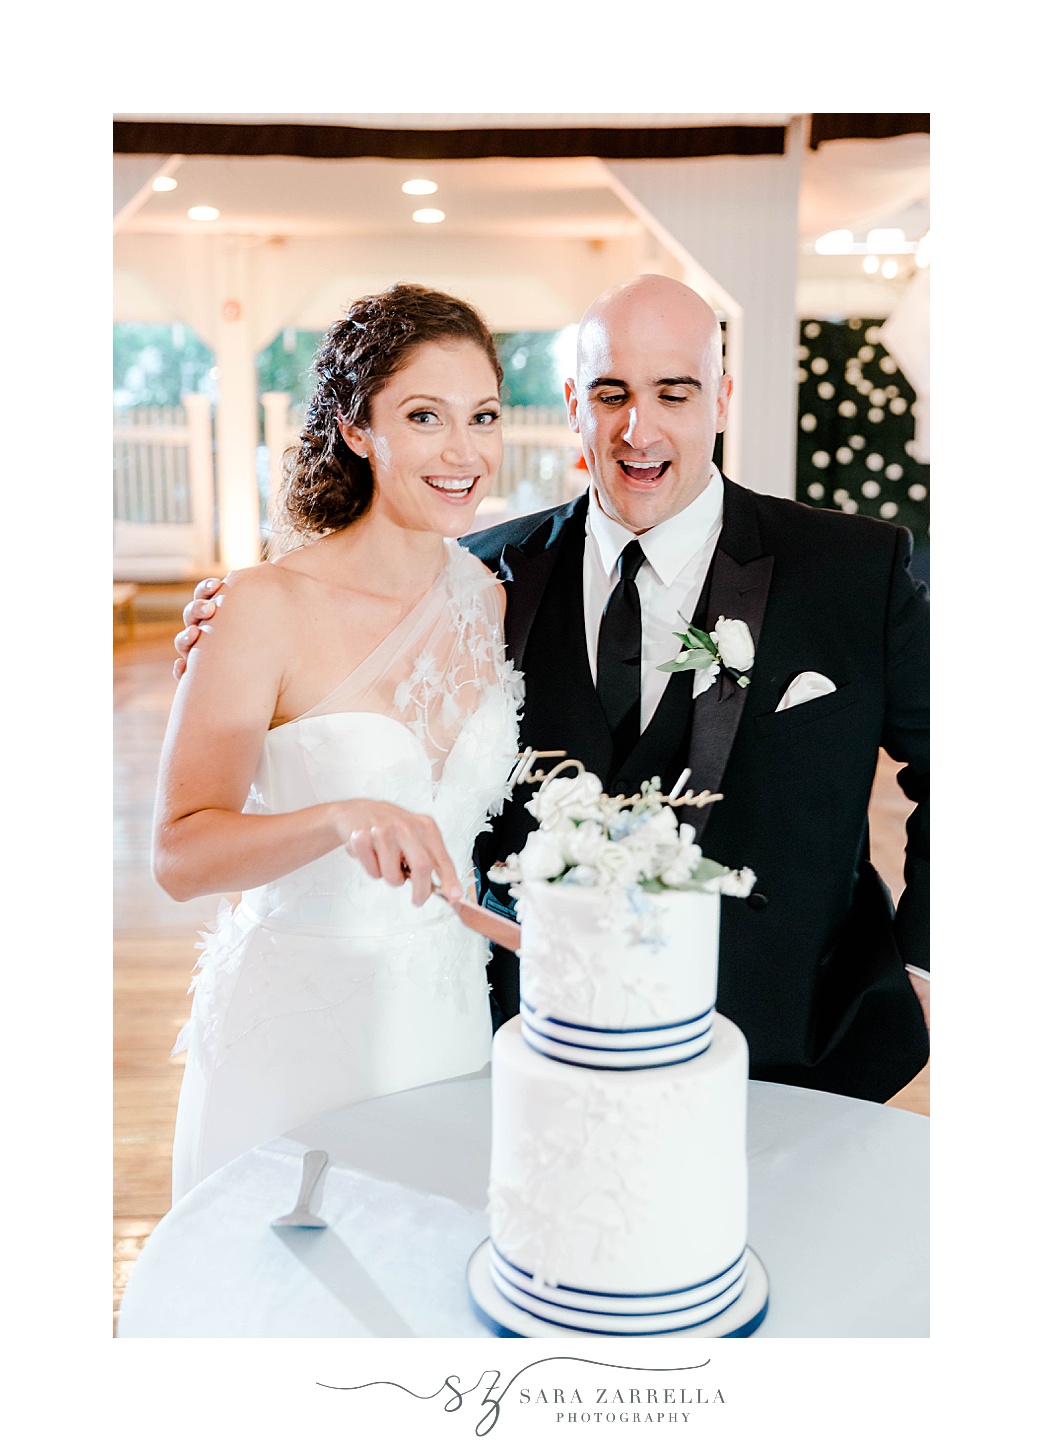 bride and groom smile by wedding cake at Regatta Place